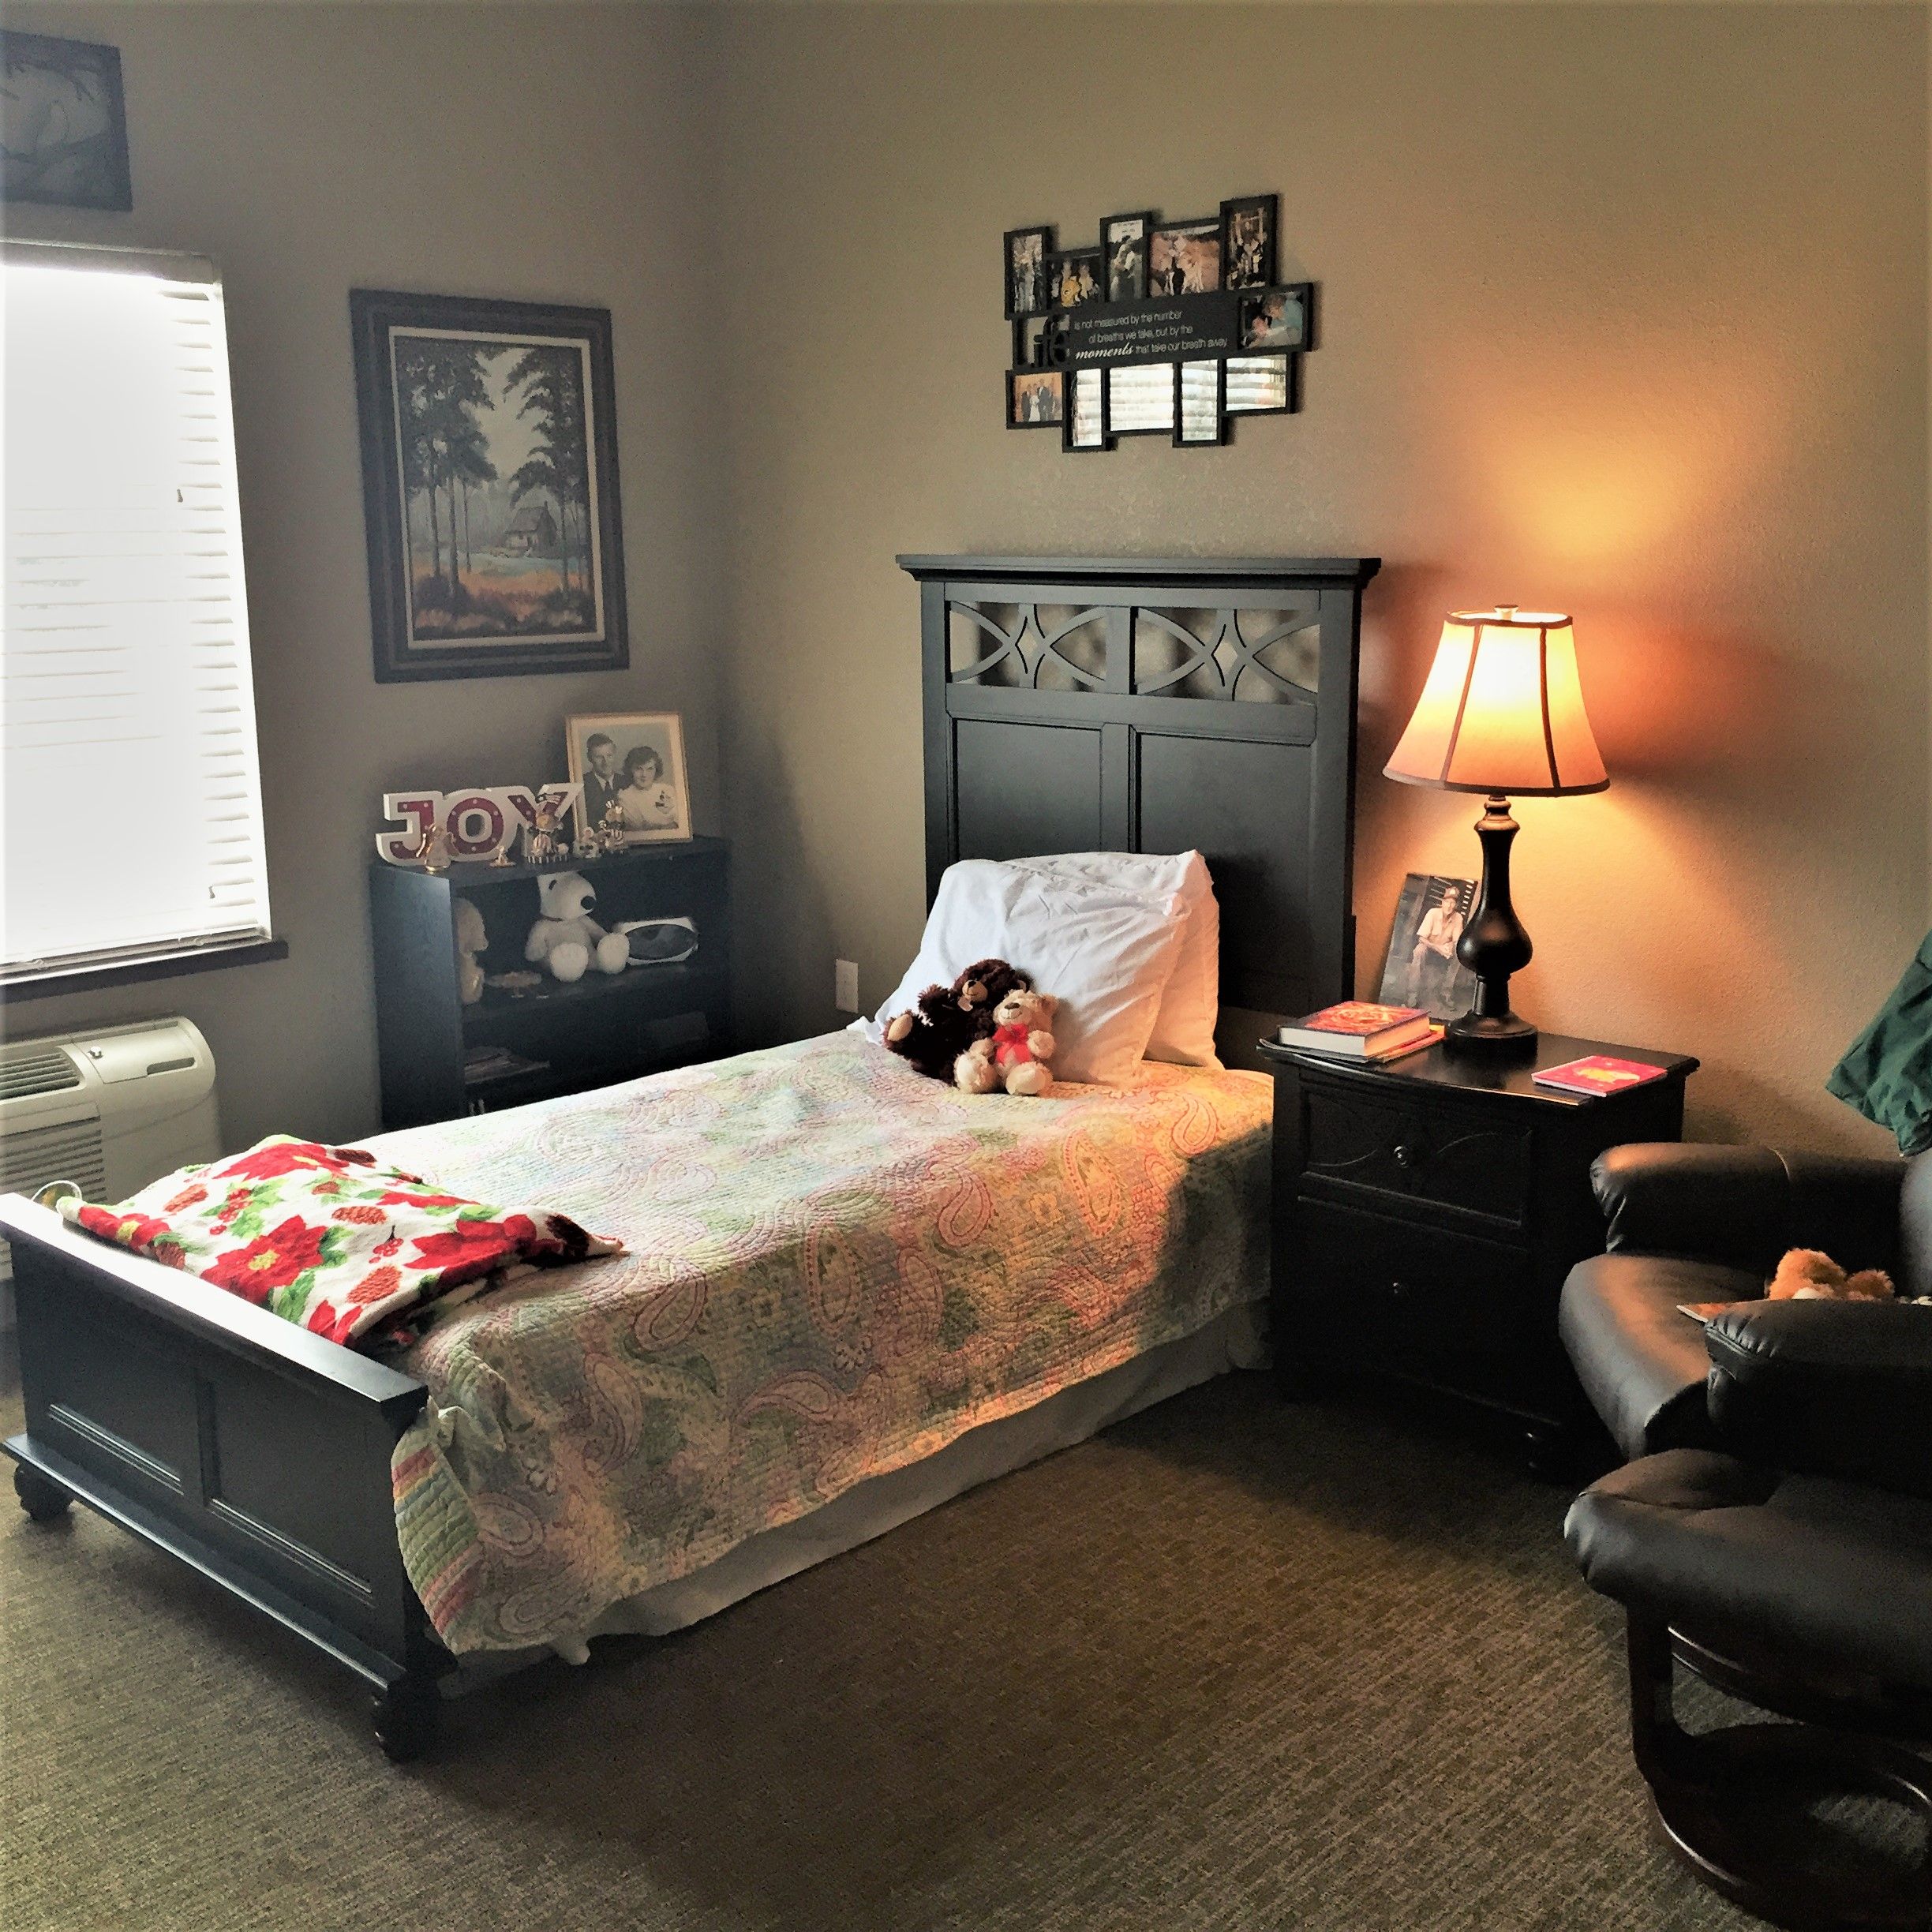 Residents at The Koselig House enjoy the comfort of private, personalized suites with attached bathroom to relax and unwind after a joy filled day!